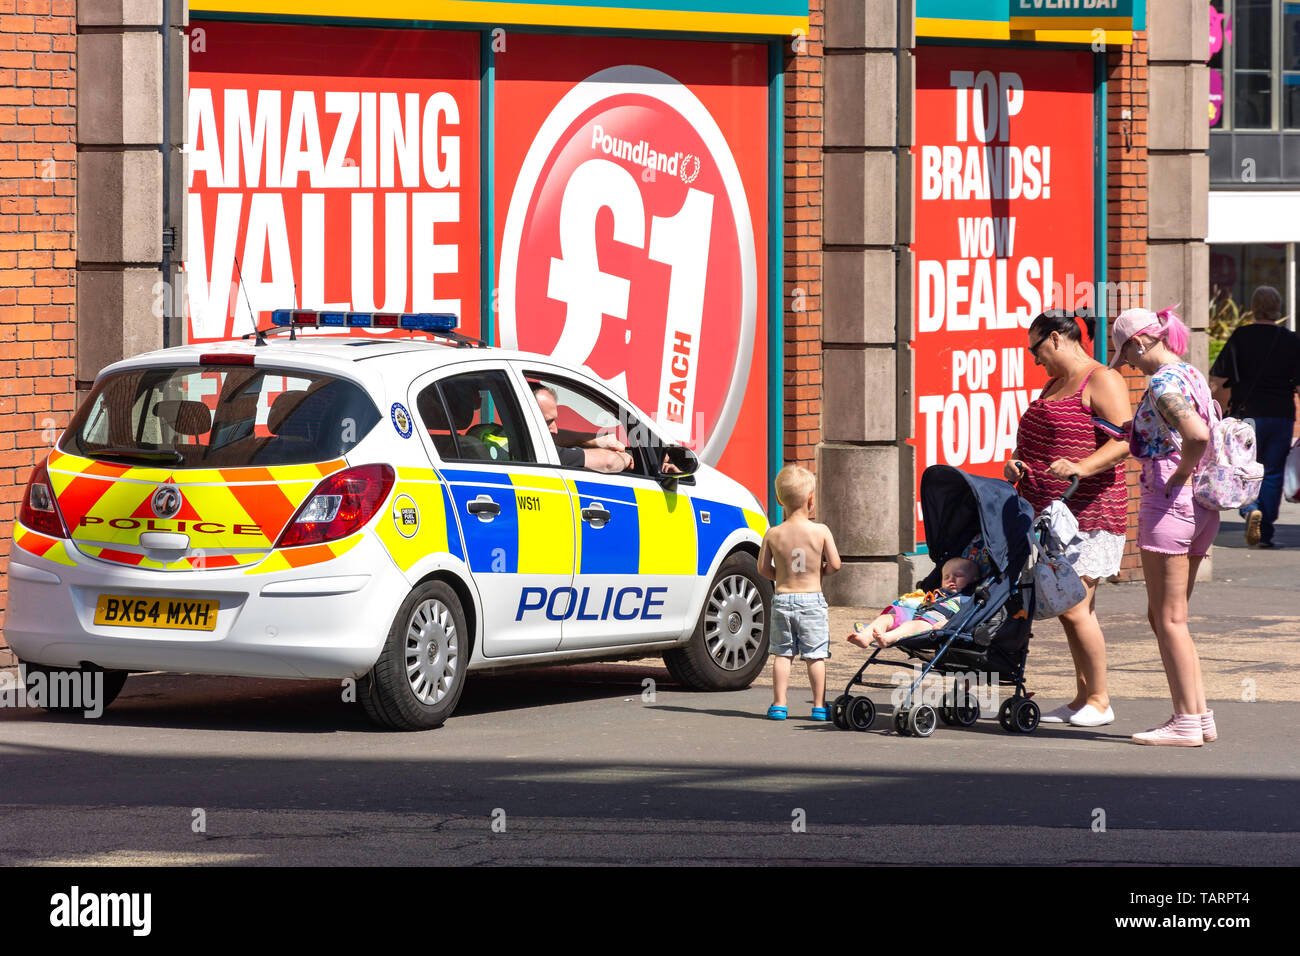 Police having fun chat with family in downtown Walsall, West Midlands, England, United Kingdom Stock Photo